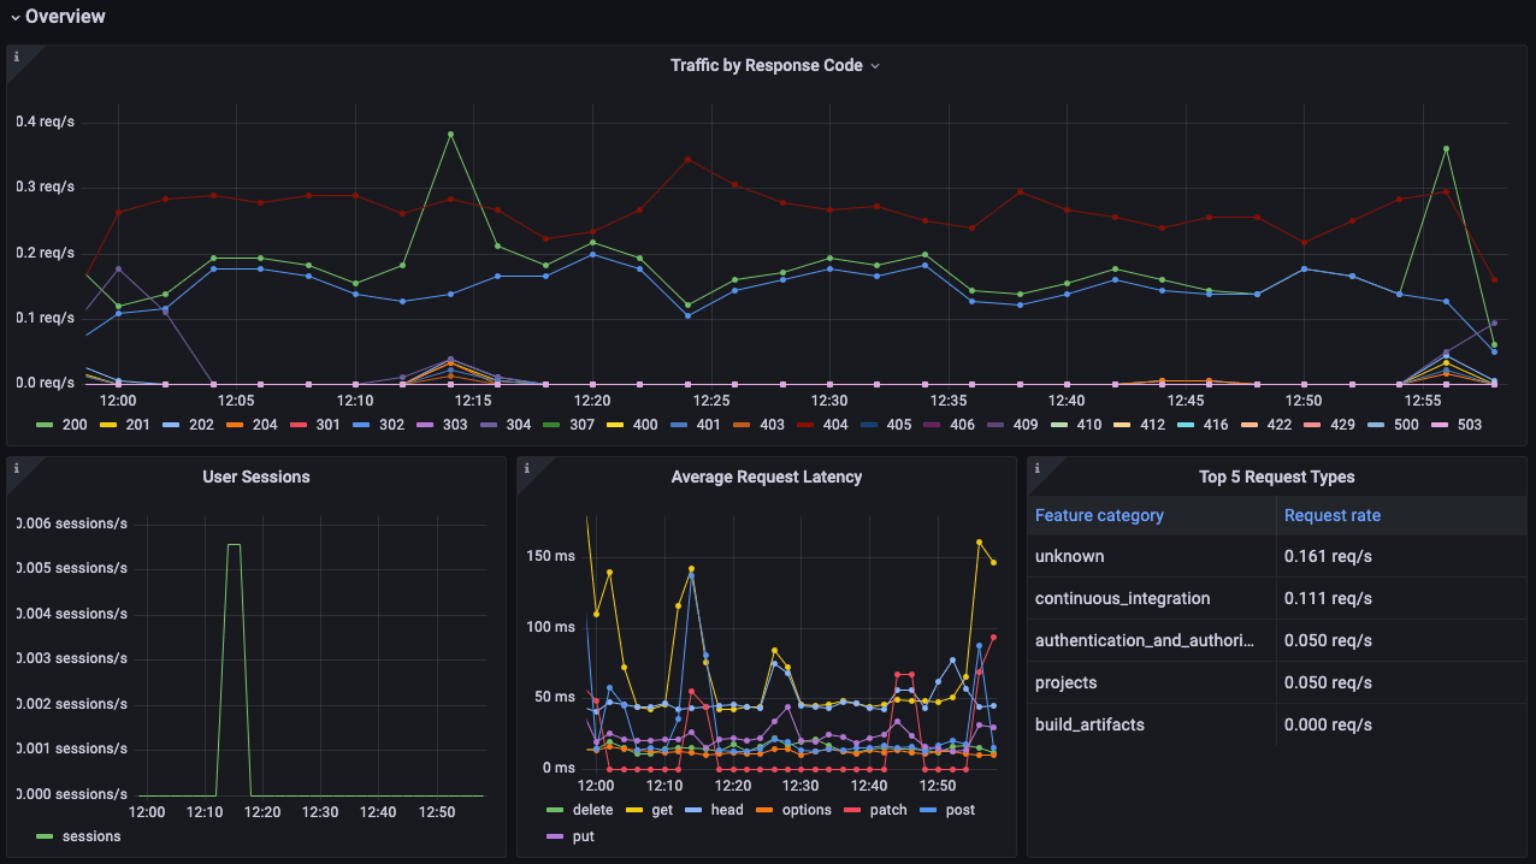 A Grafana dashboard provides an overview of a GitLab instance, including traffic by response code, user sessions, average request latency, and the top five request types.